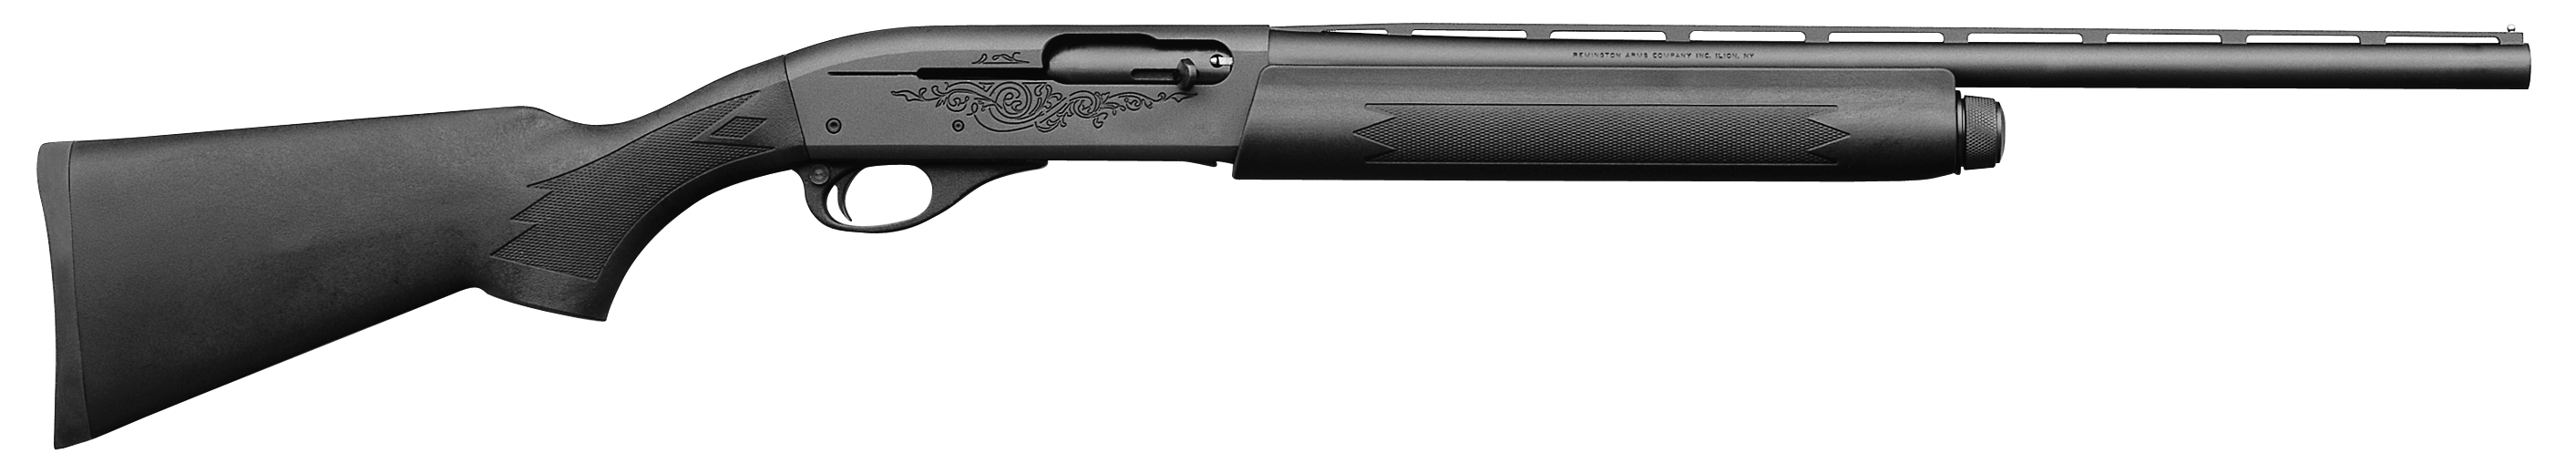 Fitted with 21" ventilated rib barrel, this 20-gauge gun has a 1"...